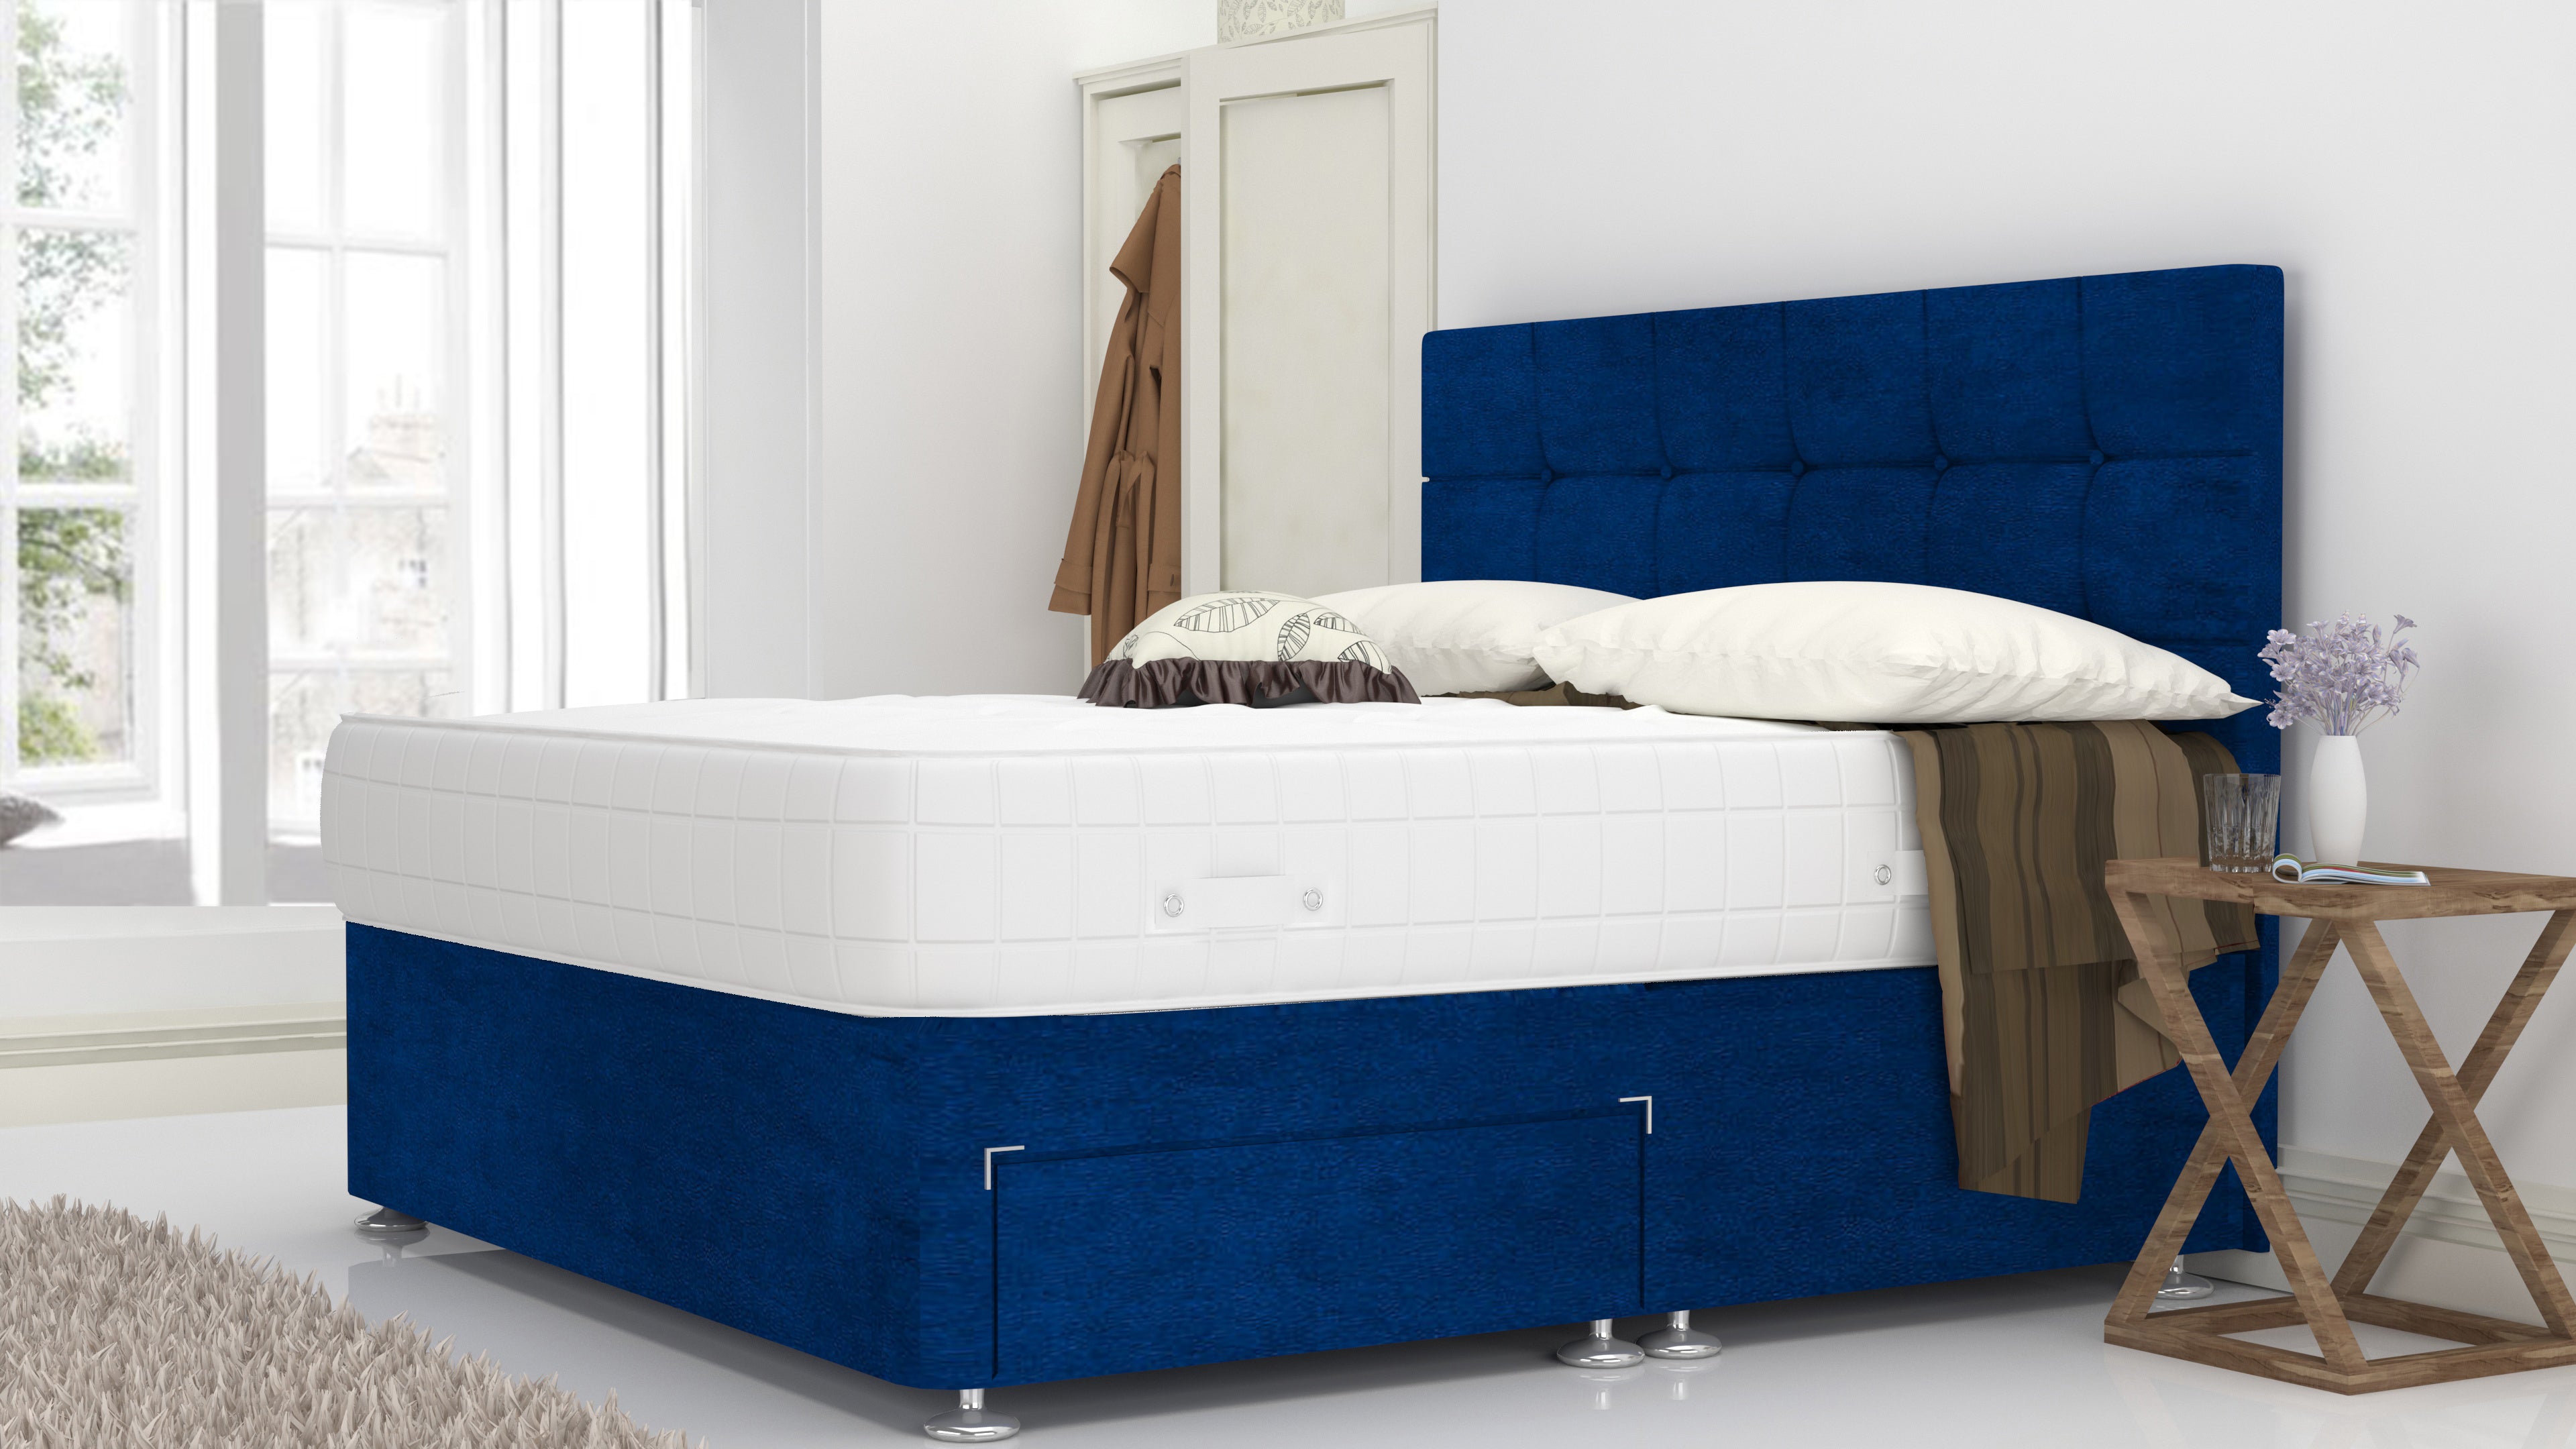 Blue Plush 4 Feet Divan Bed Set With Cube Headboard (Included Feet) And Free Orthopedic Mattress